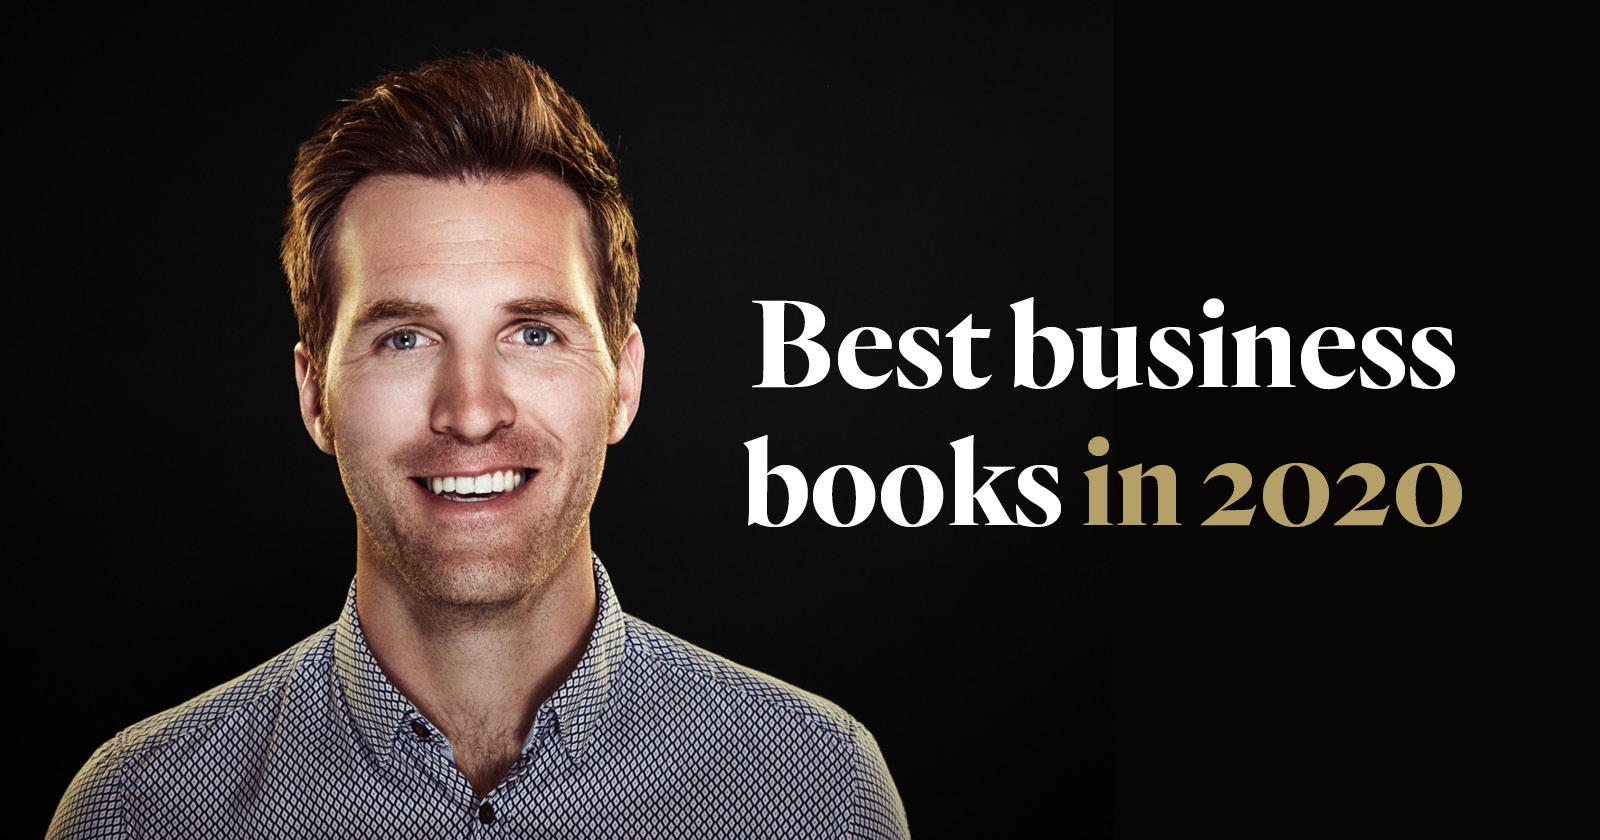 The best business books to read or listen to in 2020 and why